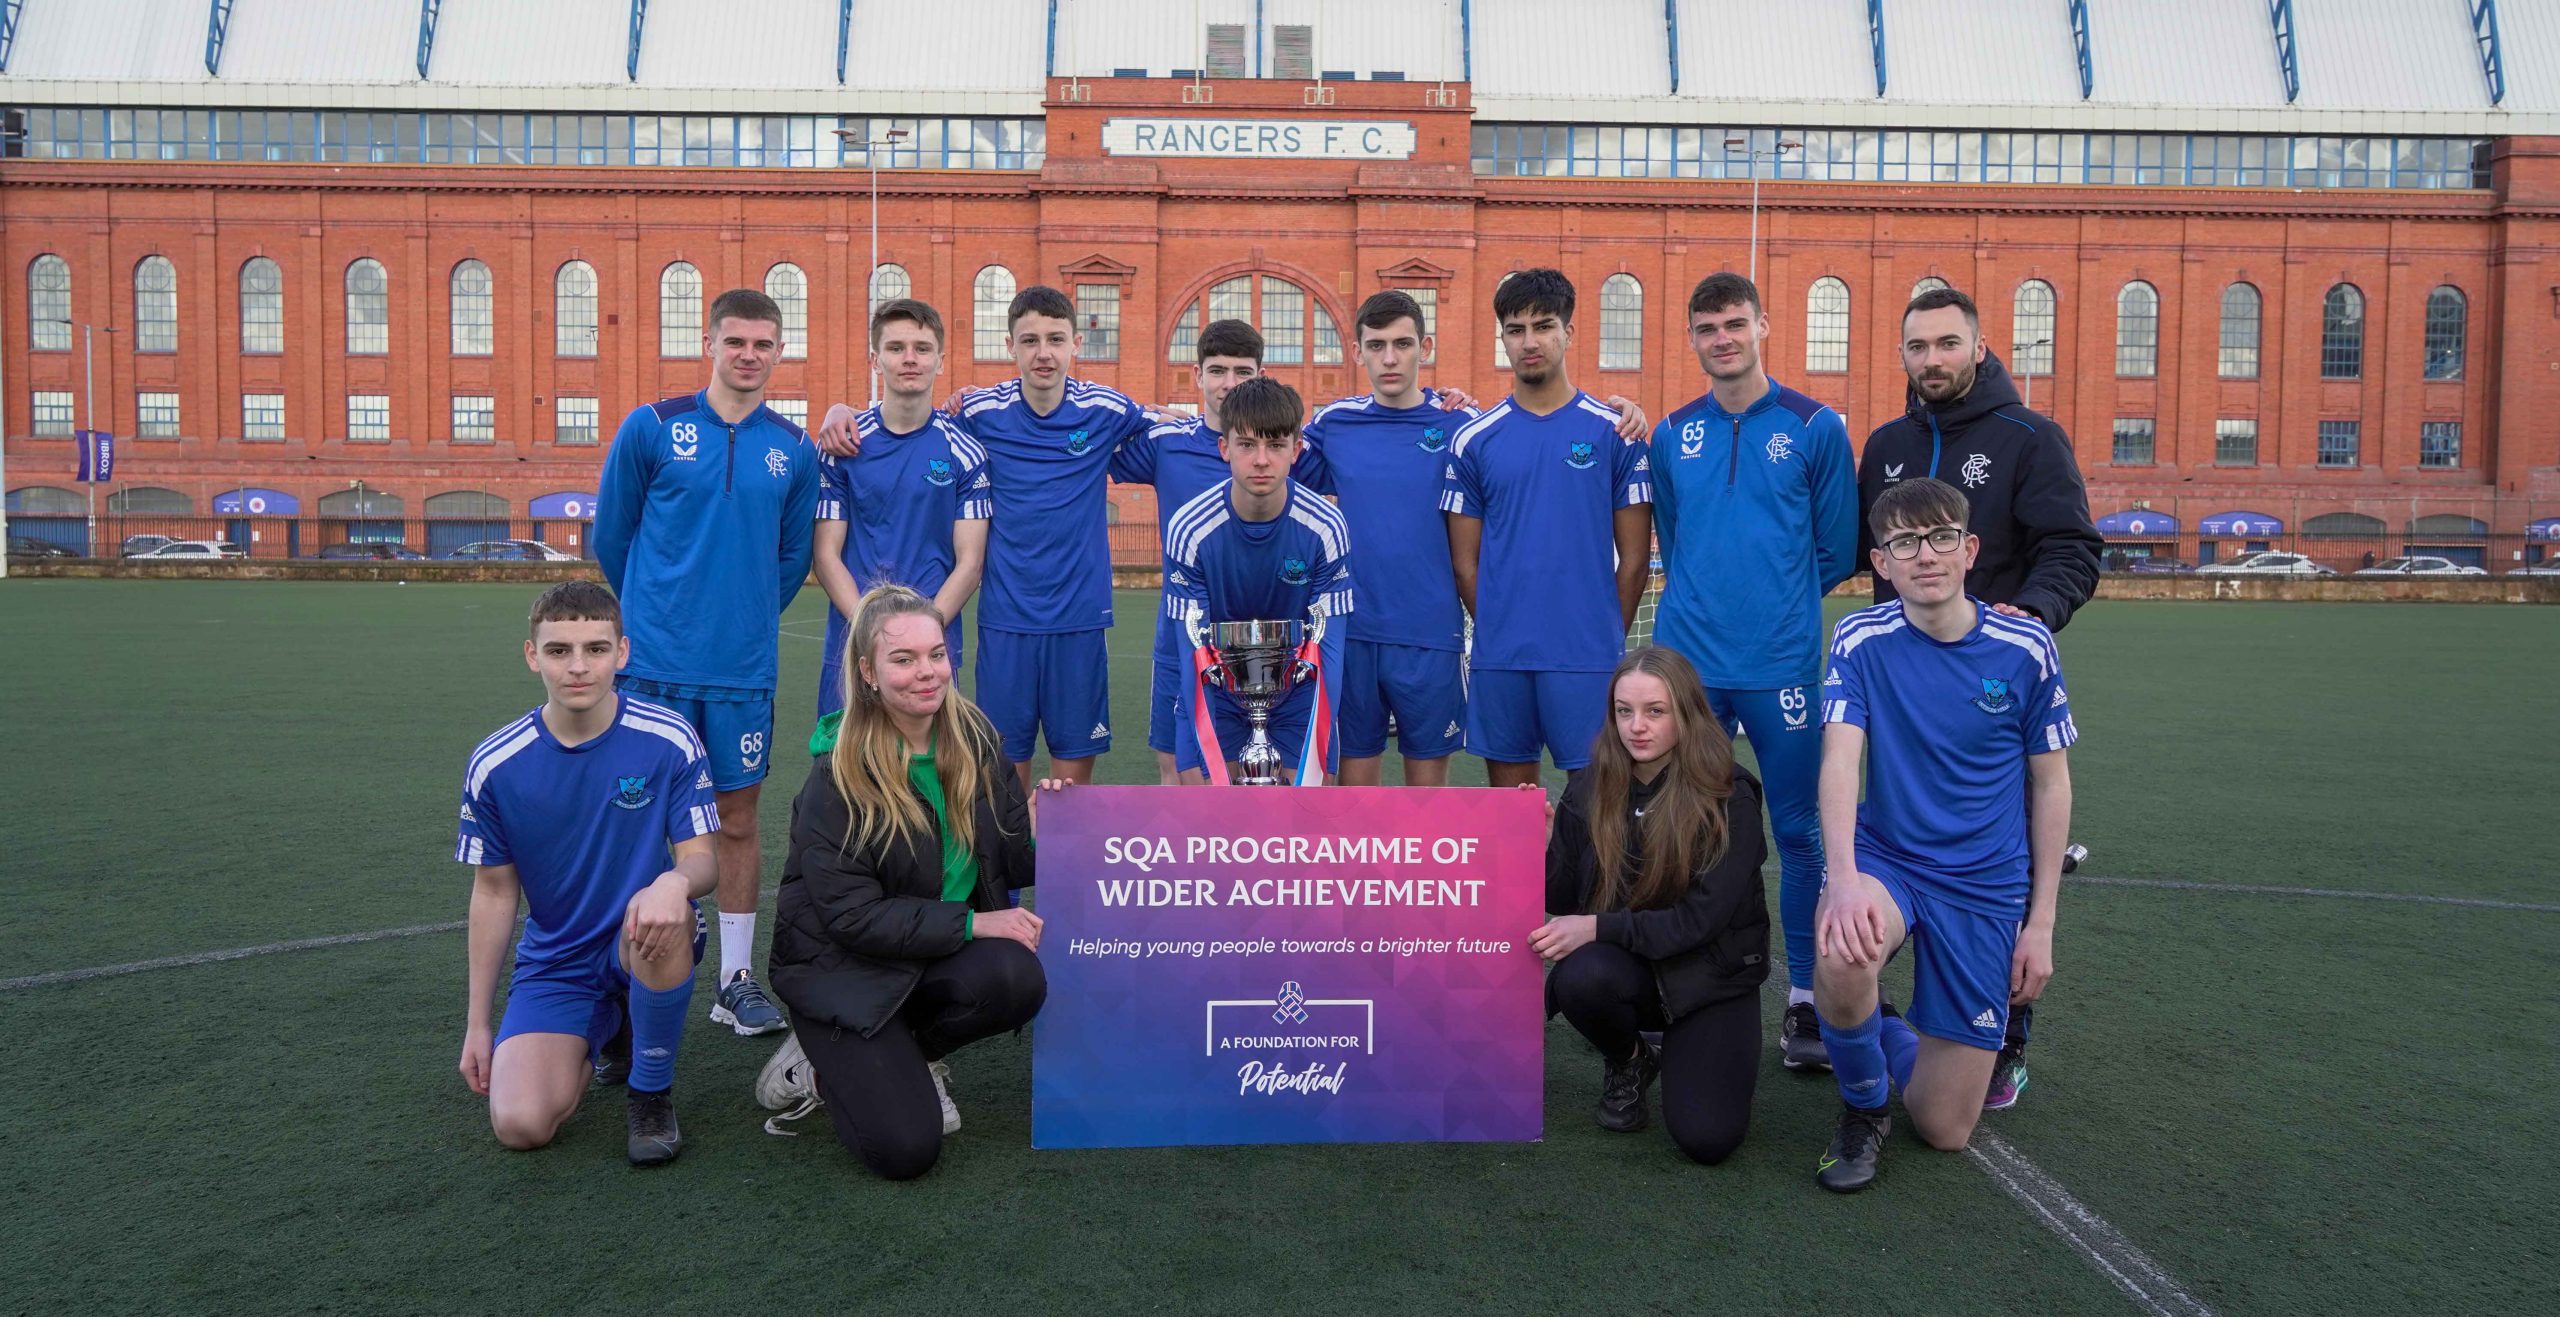 Rangers B Team Players Join Pupils At Tournament To Celebrate Building Brighter Futures